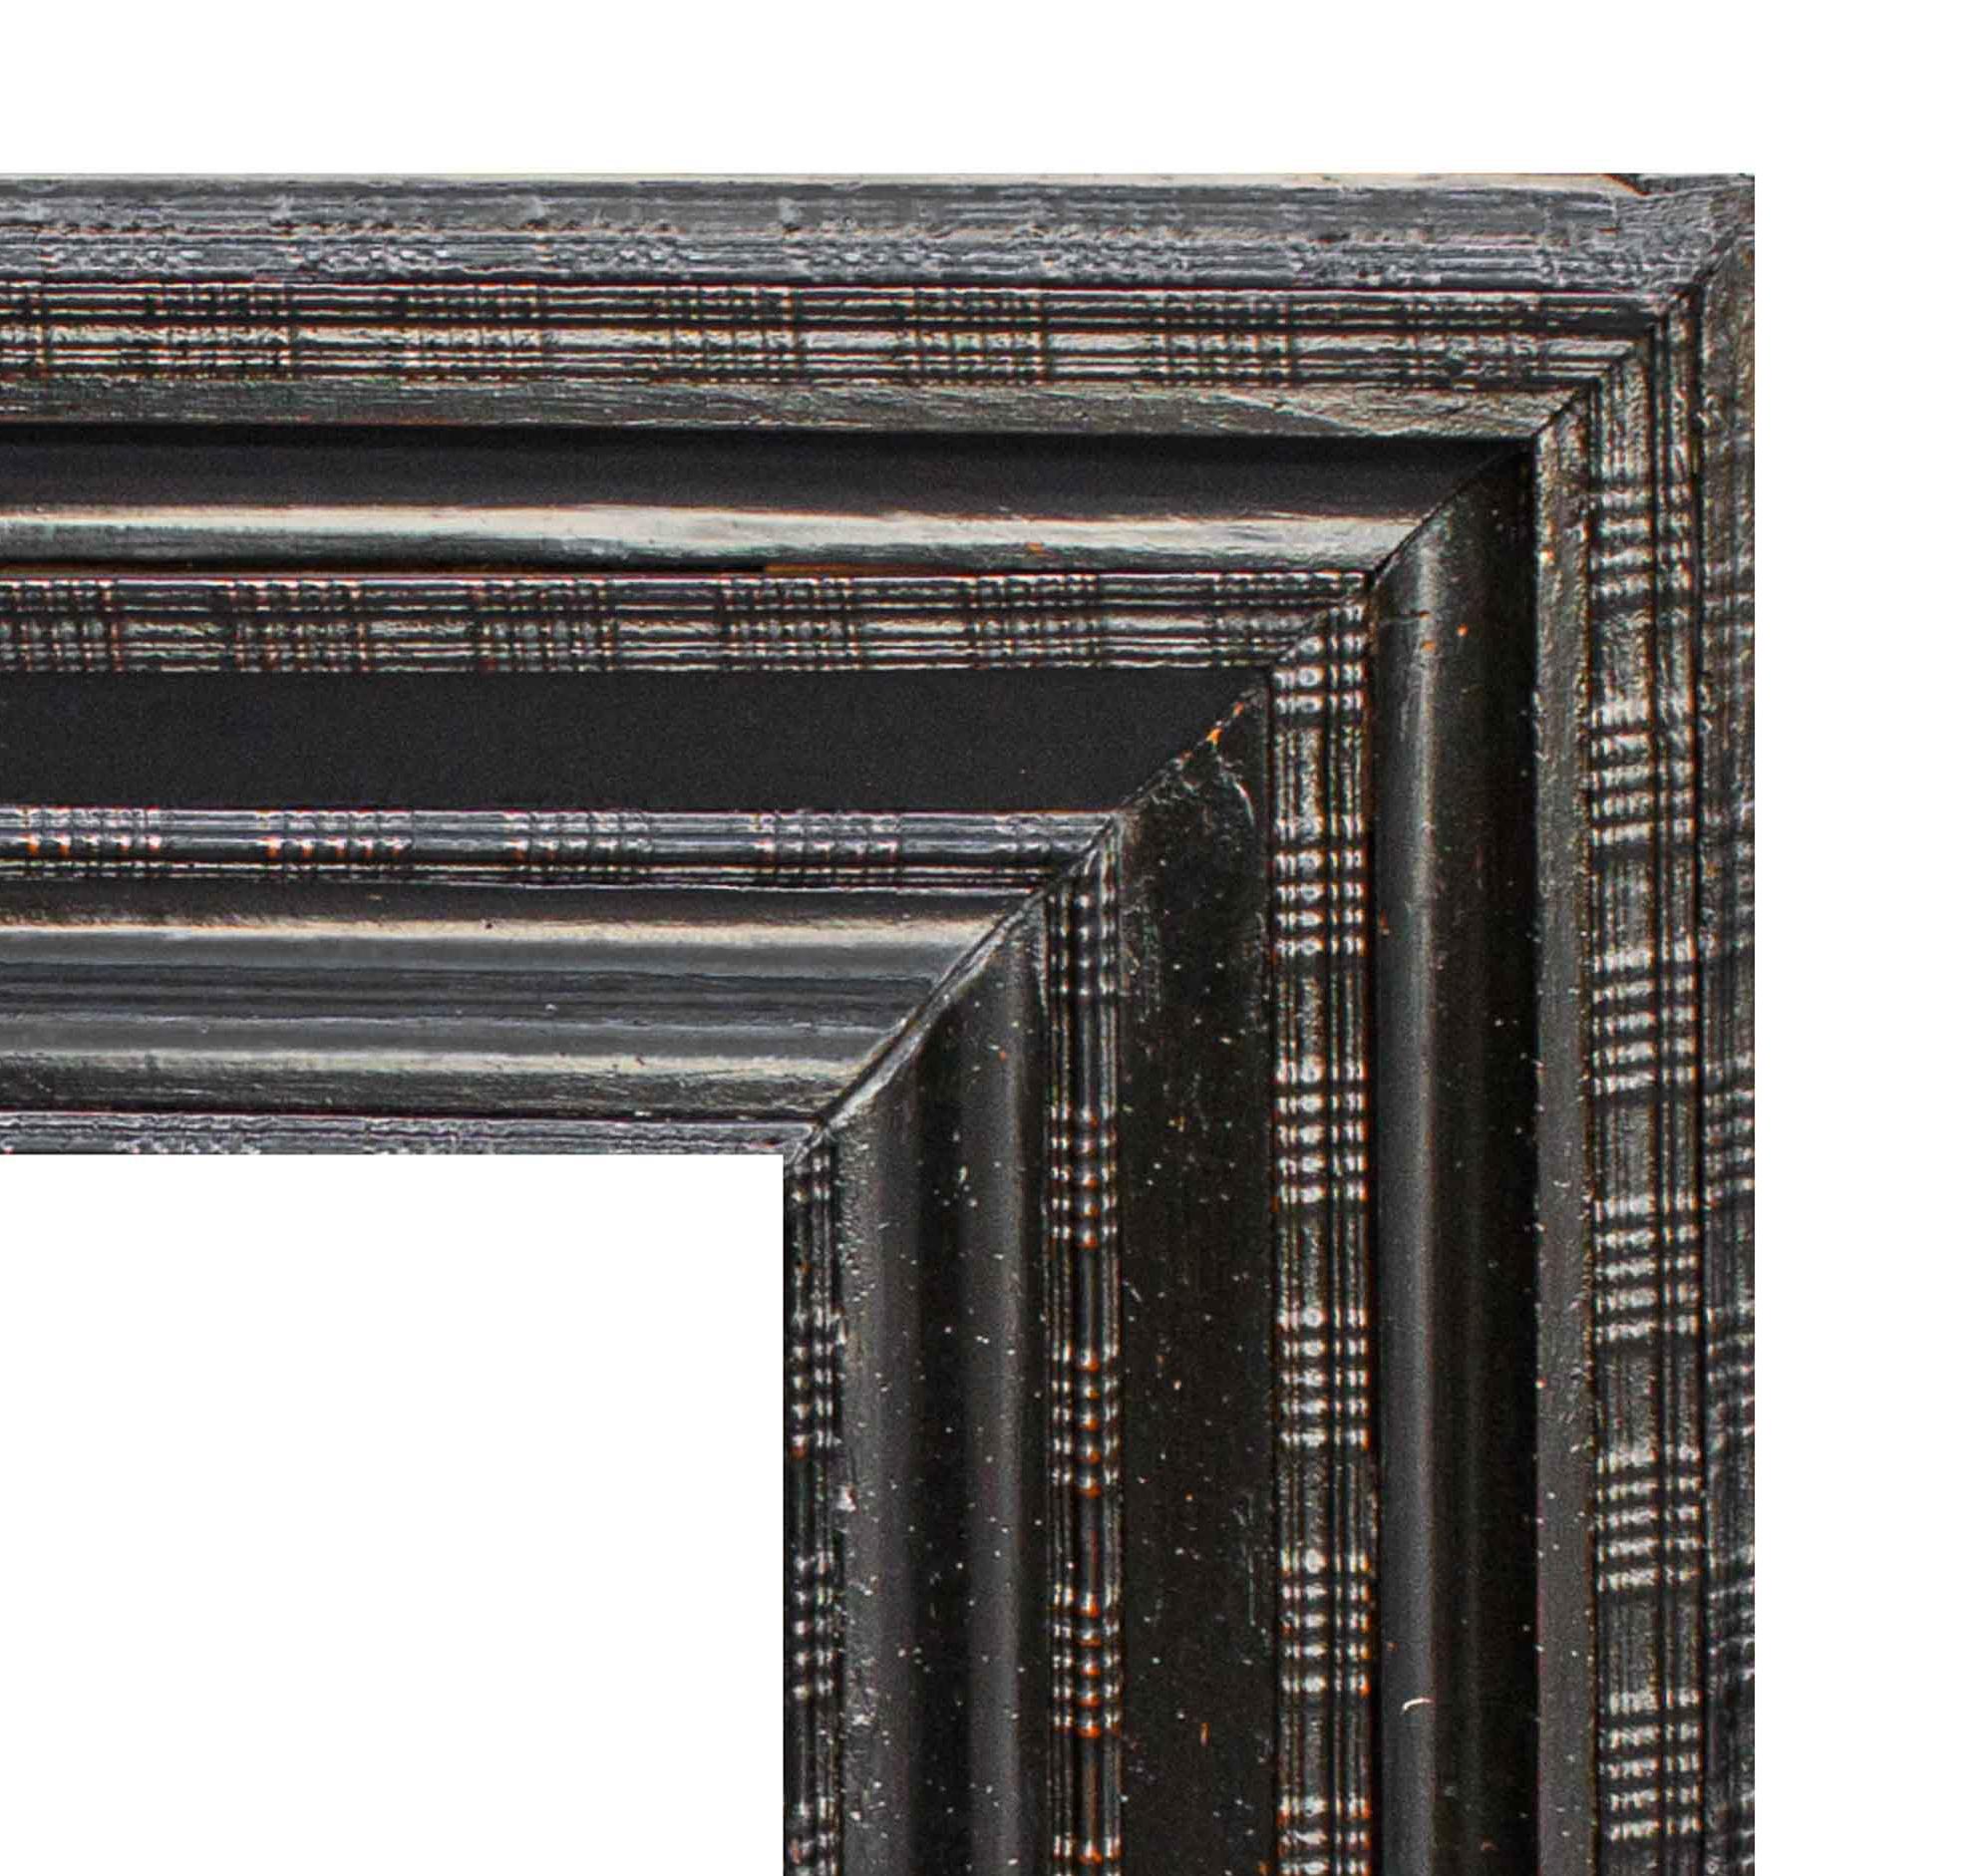 17th century
Guilloche frame in ebonized finish
Wood, cm 89 x 79

Referable to the seventeenth century, the ebonized frame examined has a carving called guilloché, whose band looks like a succession of smooth gorges alternating with bands carved